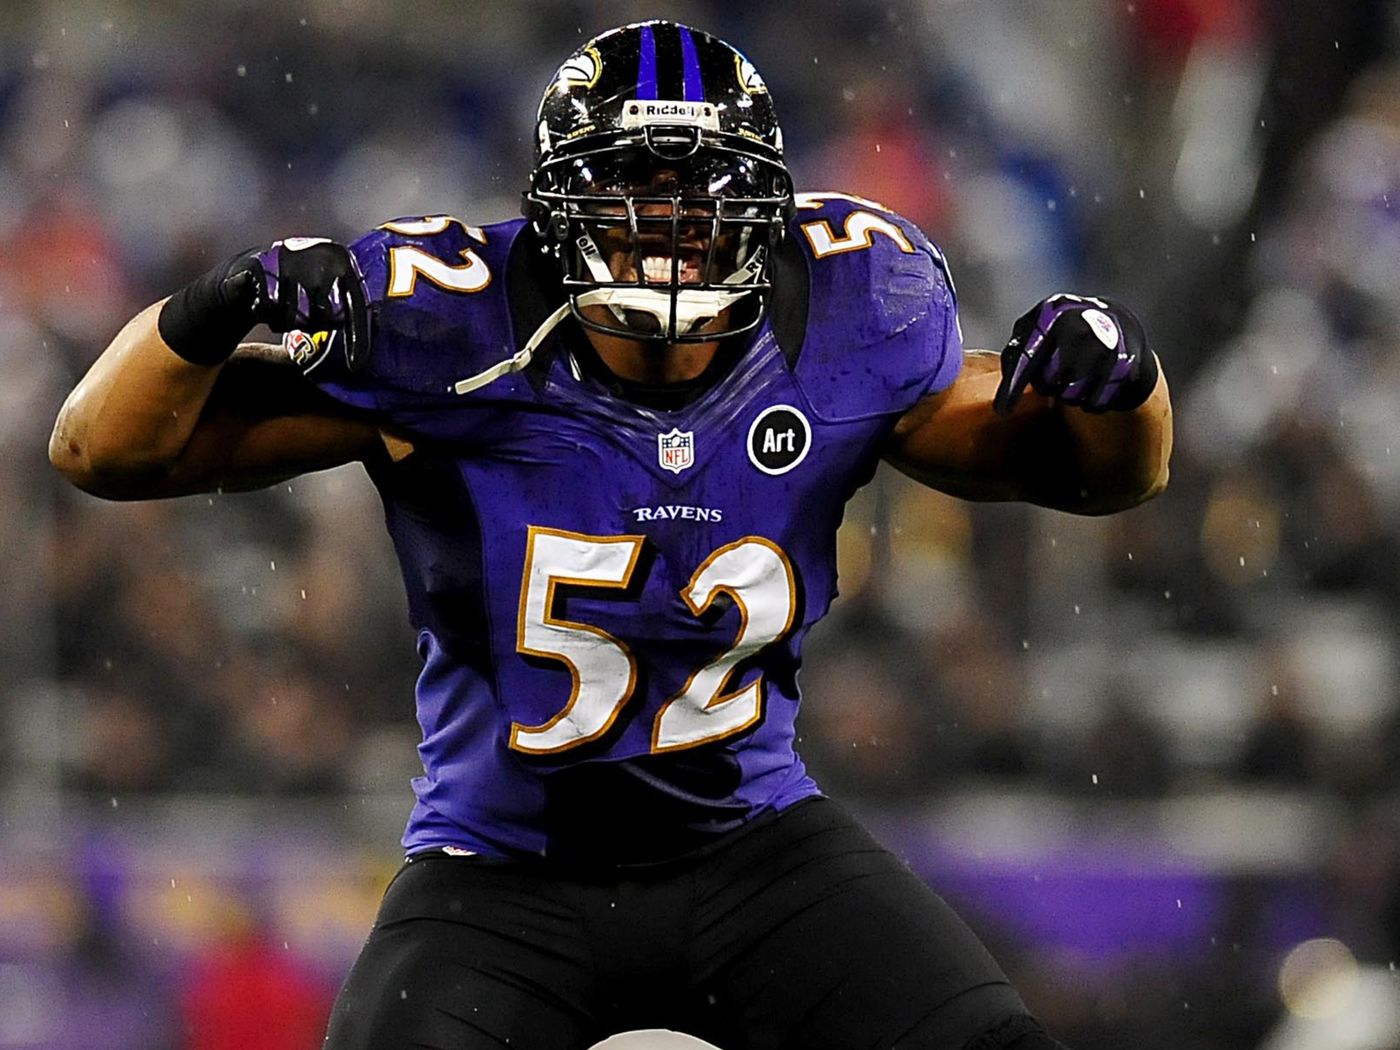 Cool Ray Lewis Wallpapers